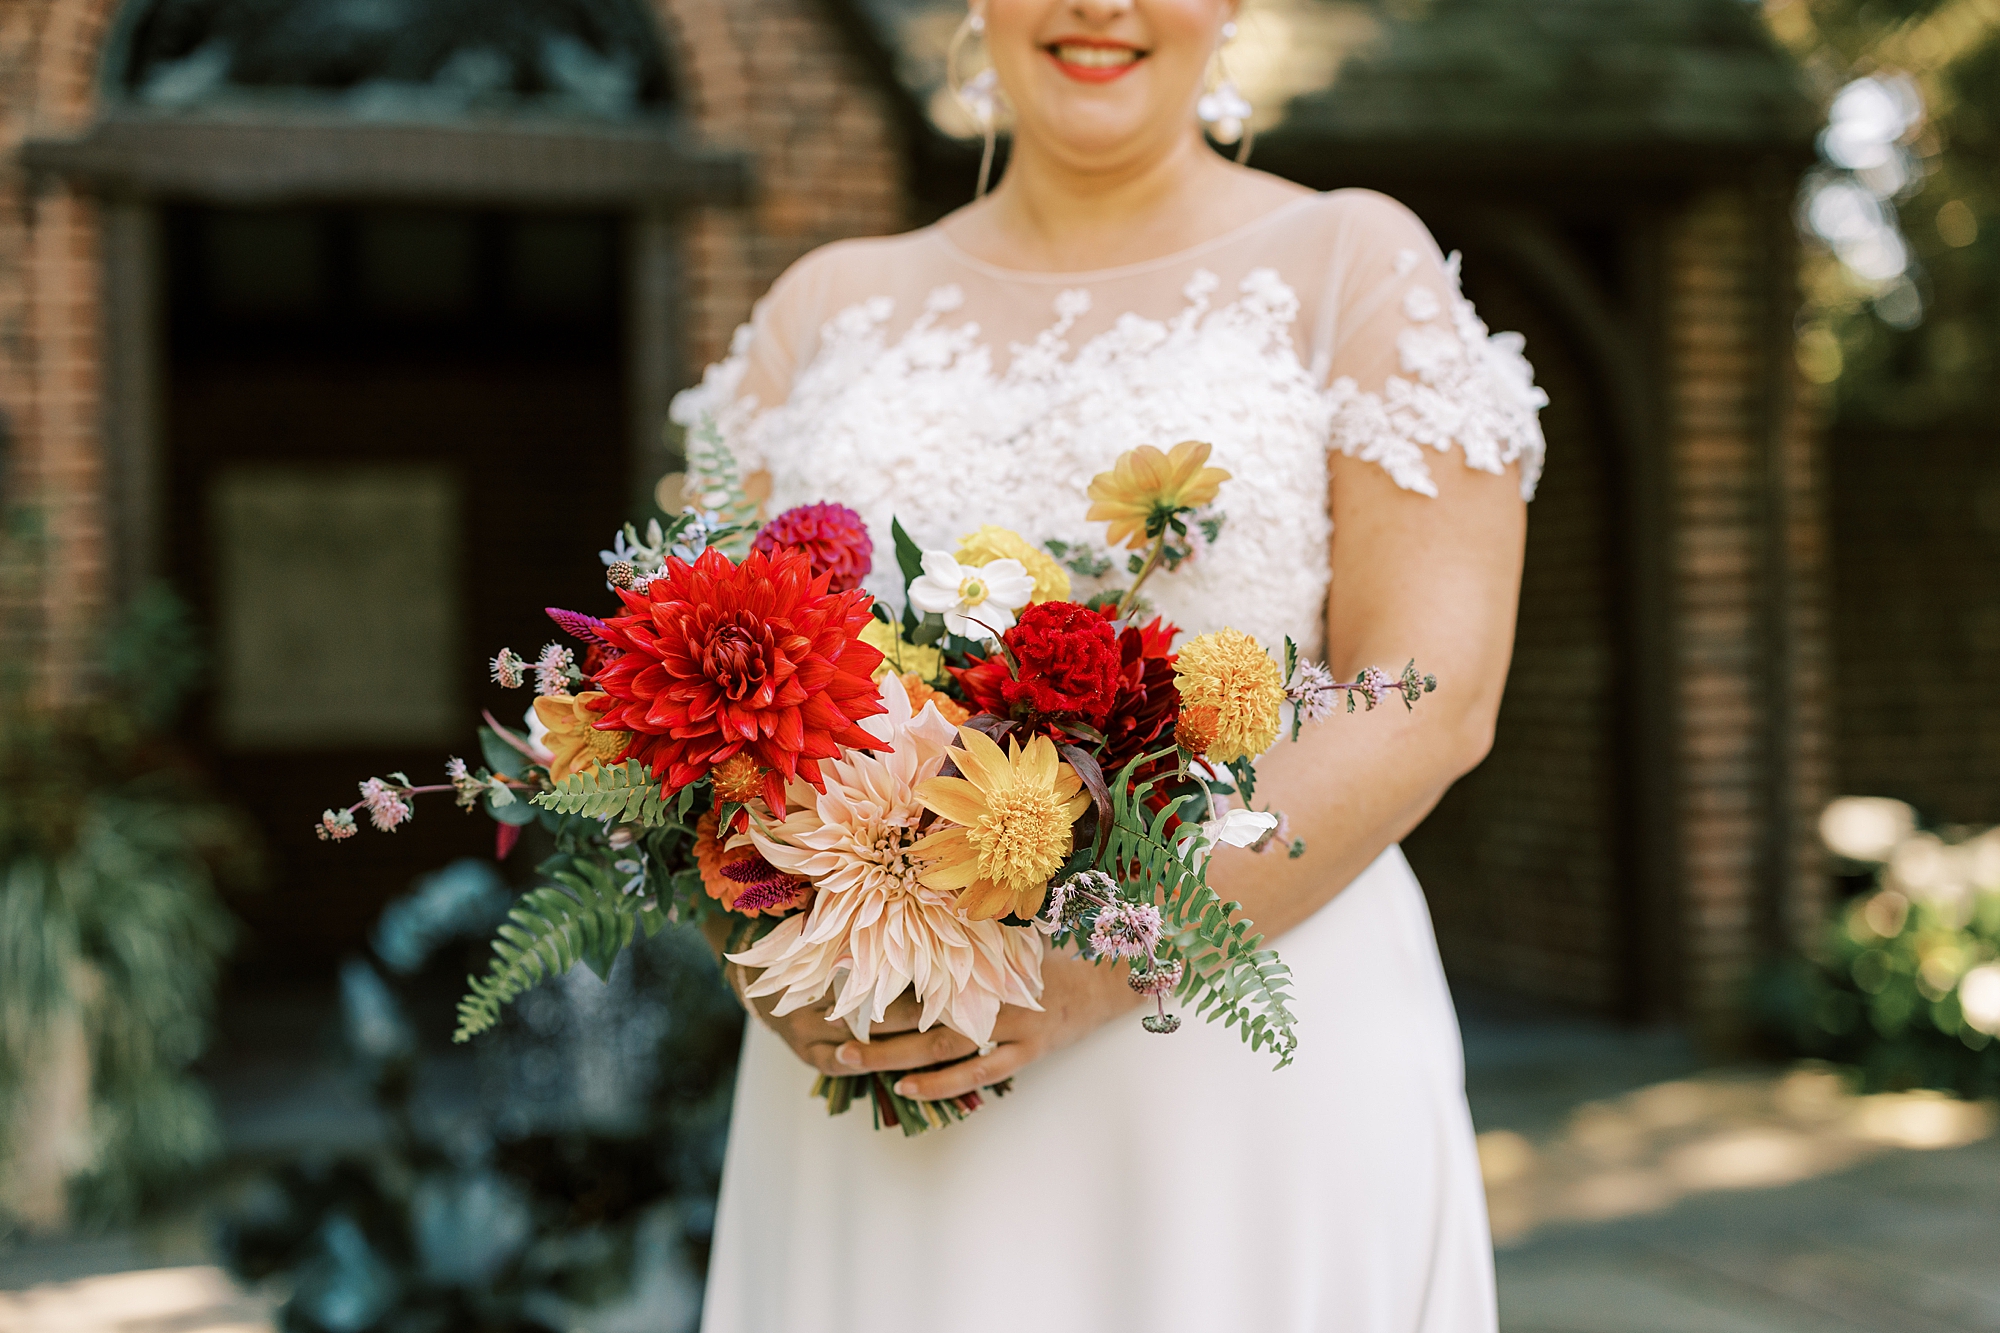 bride in wedding gown with lace cover holds bouquet of red and yellow flowers 